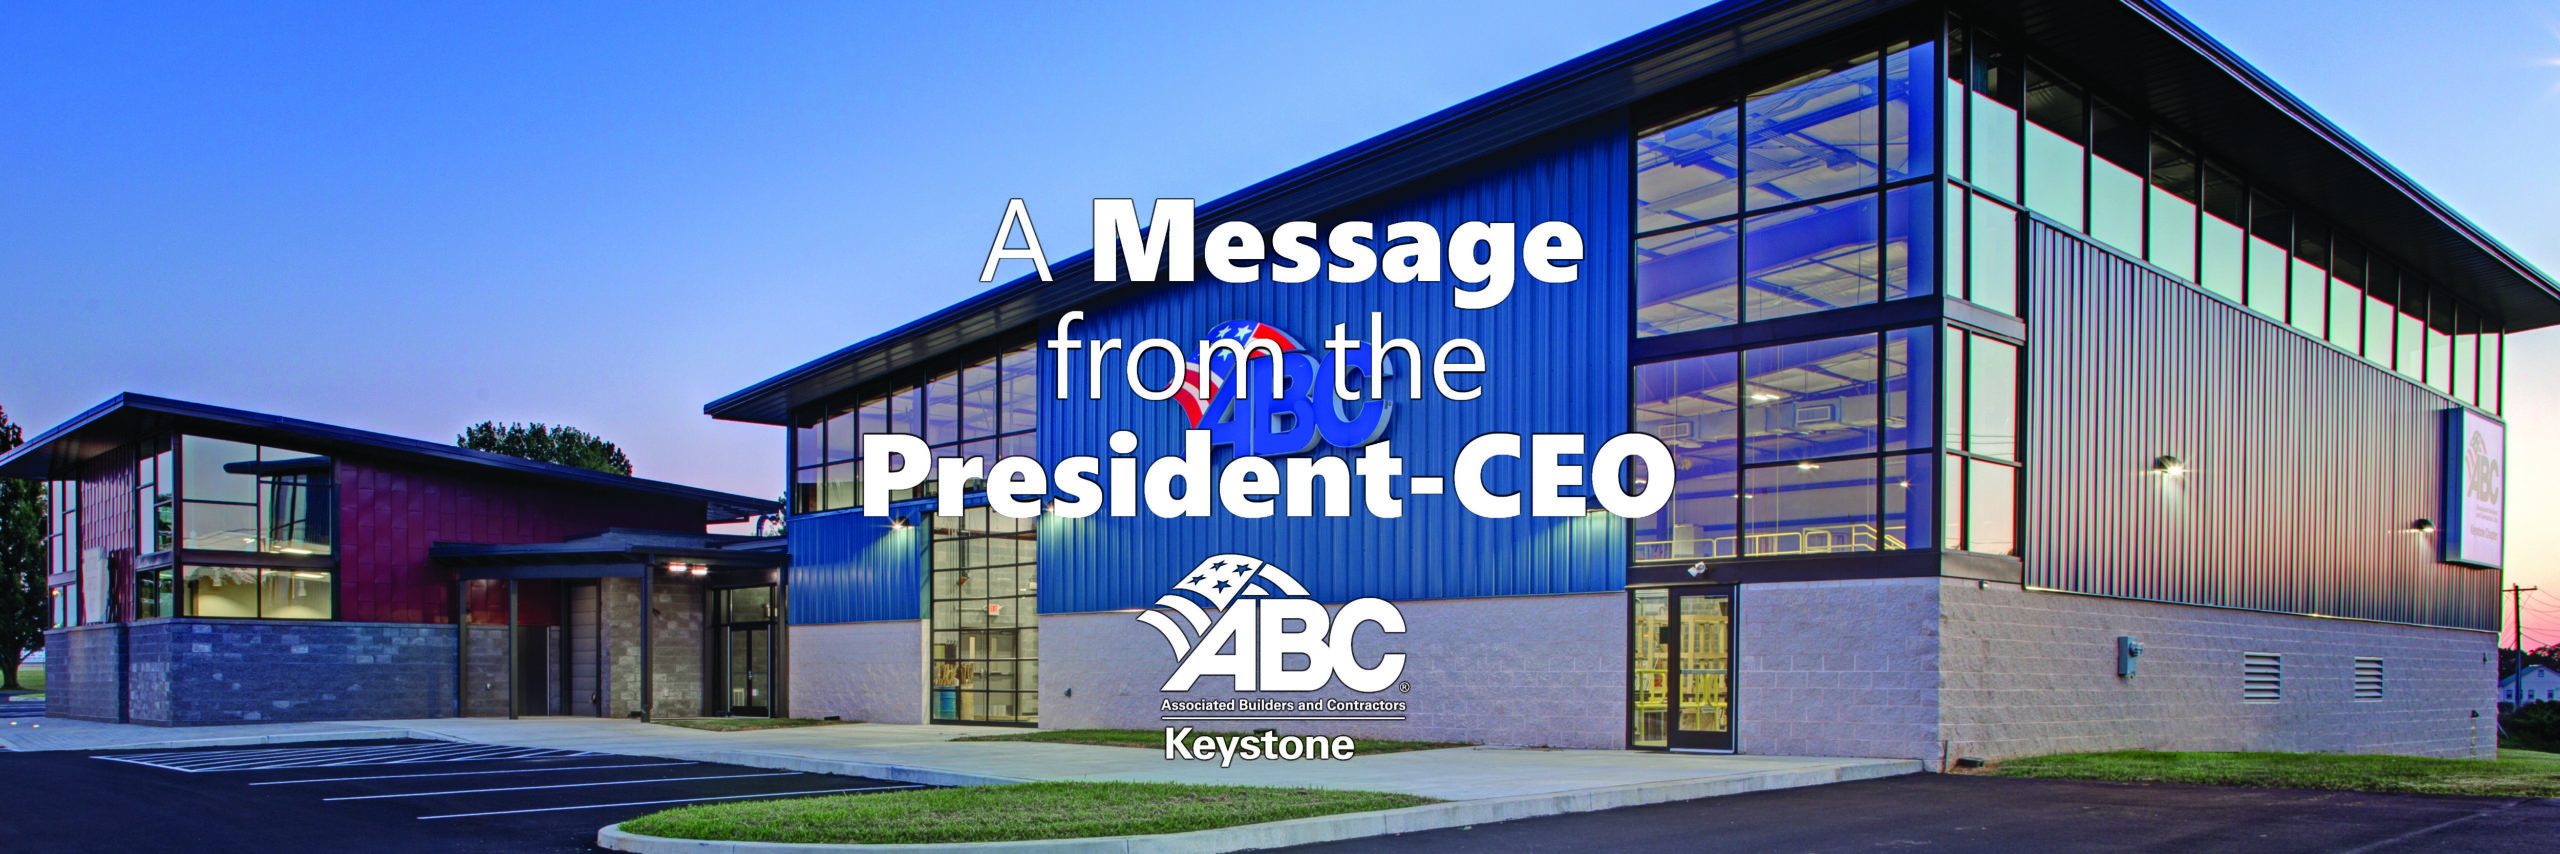 ABC Keystone Message from the President